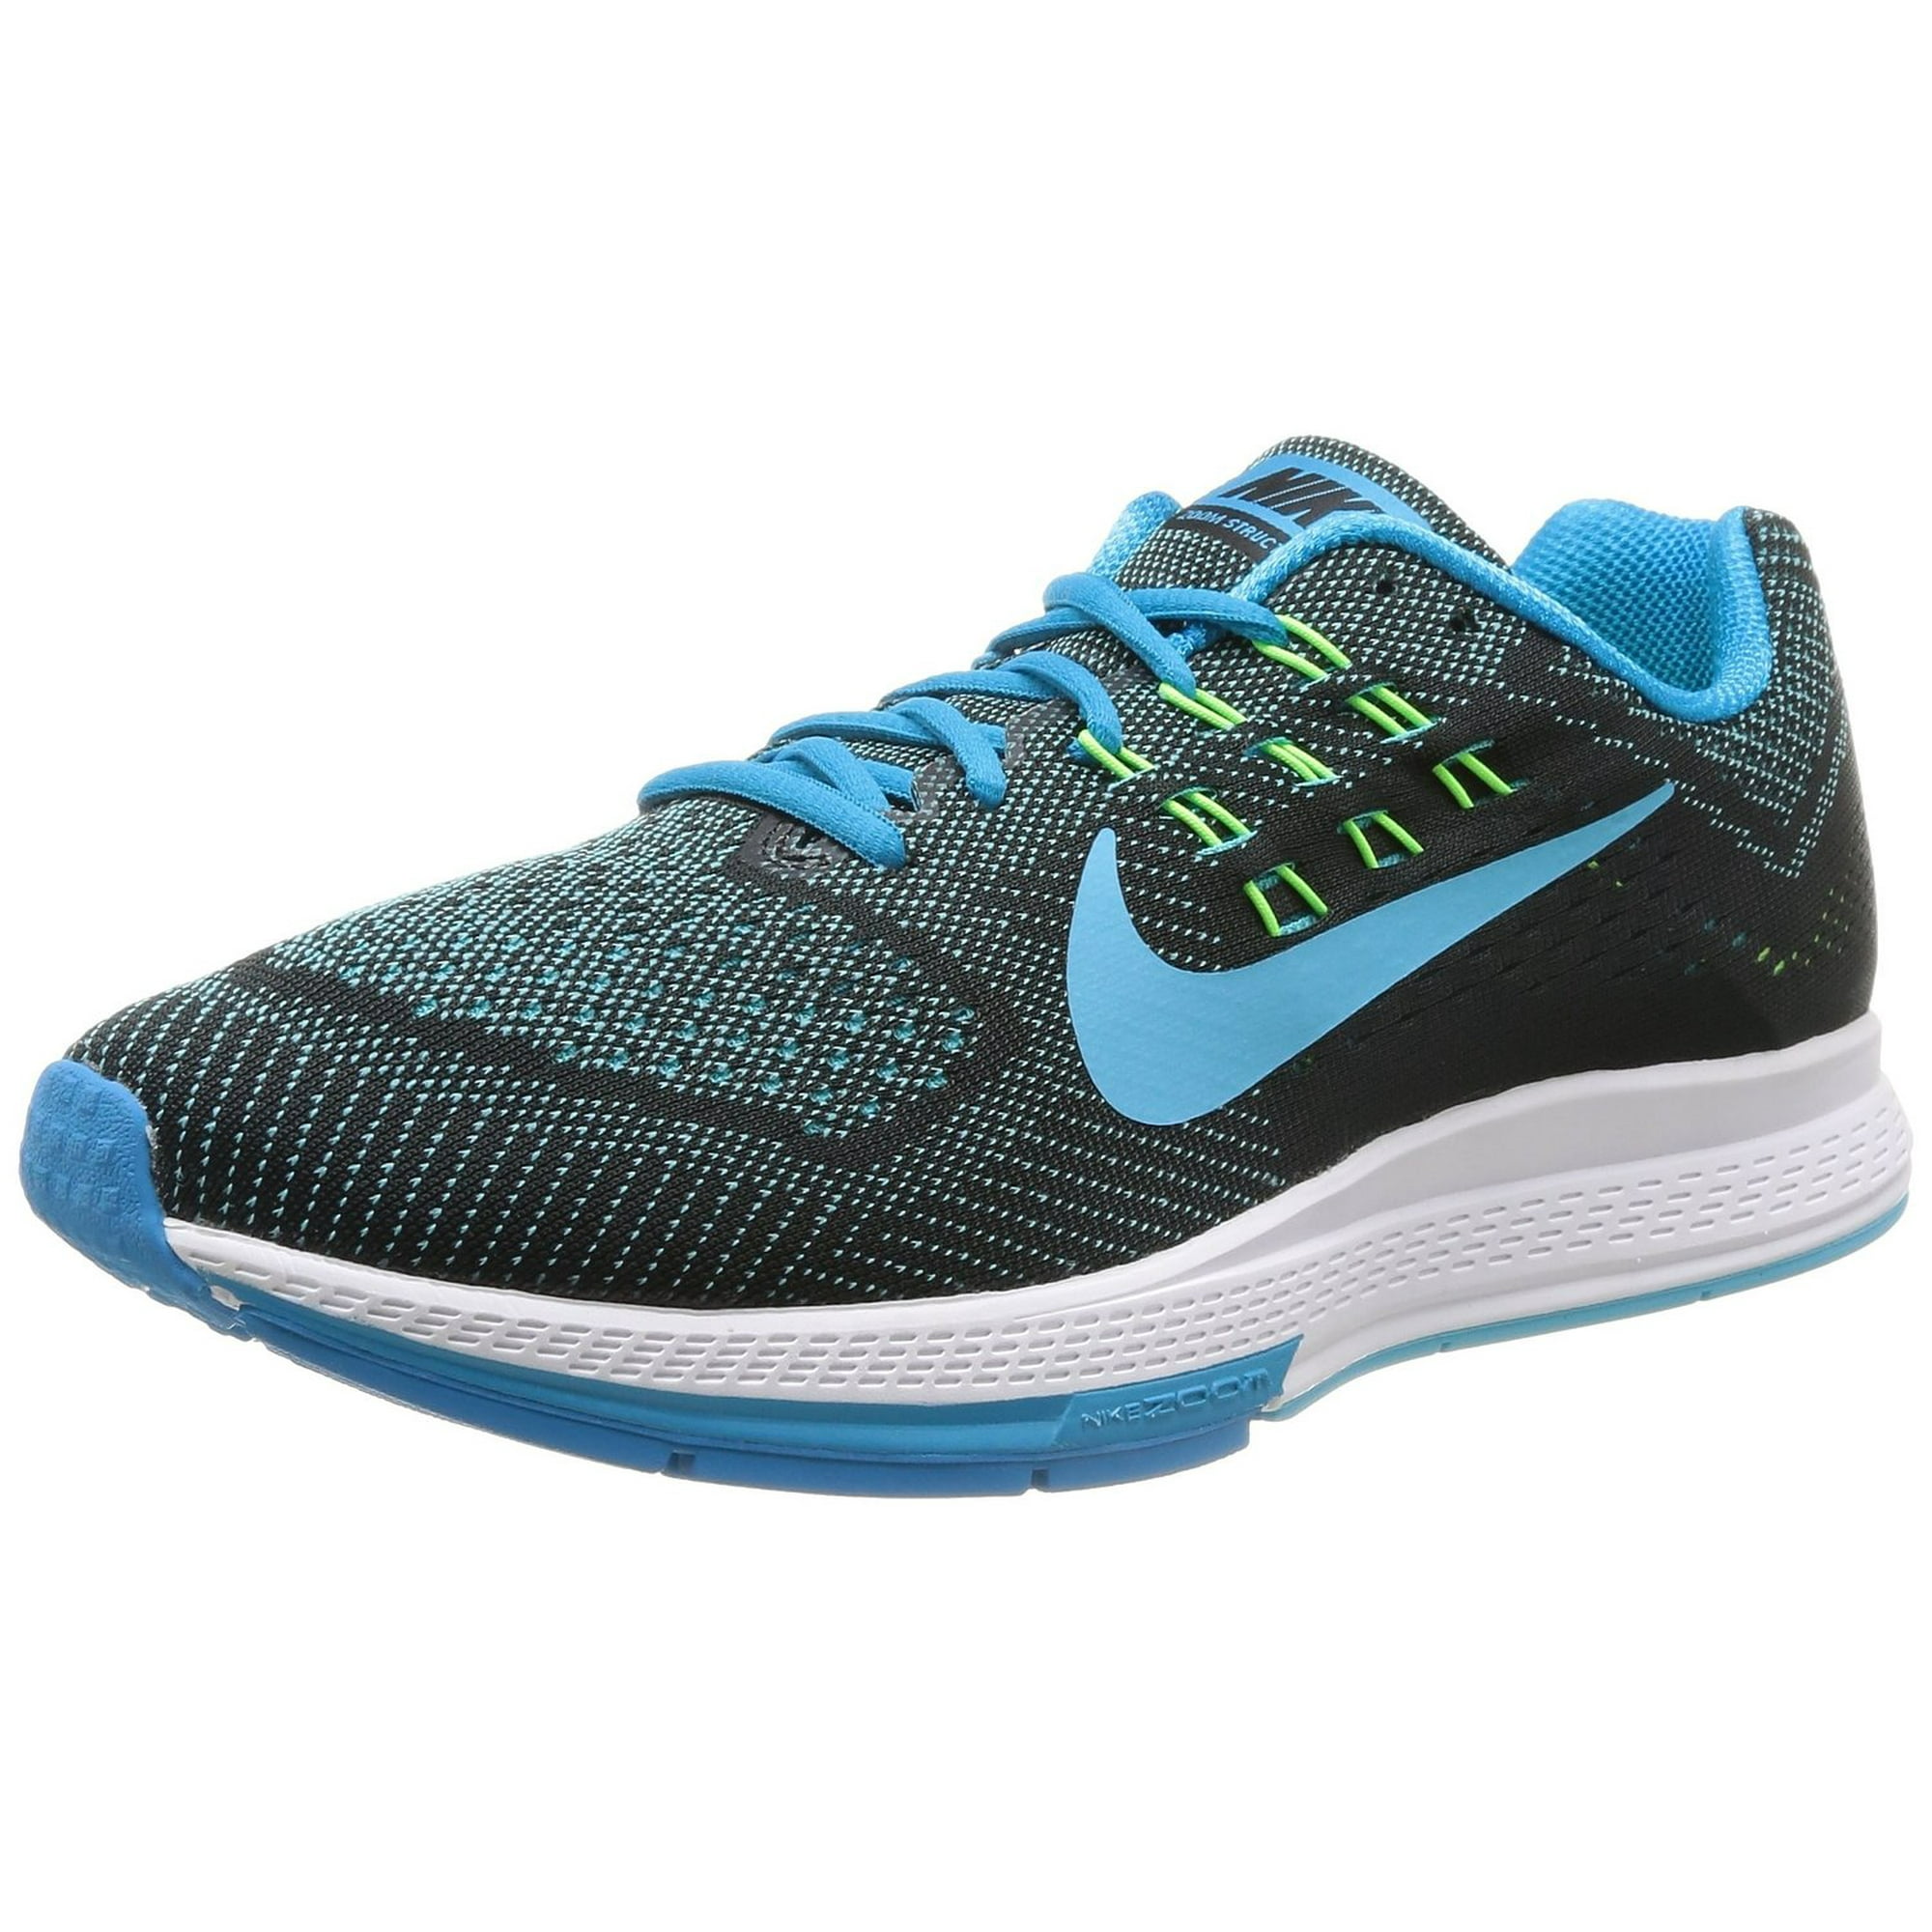 Nike Men's Zoom Structure Running Shoes